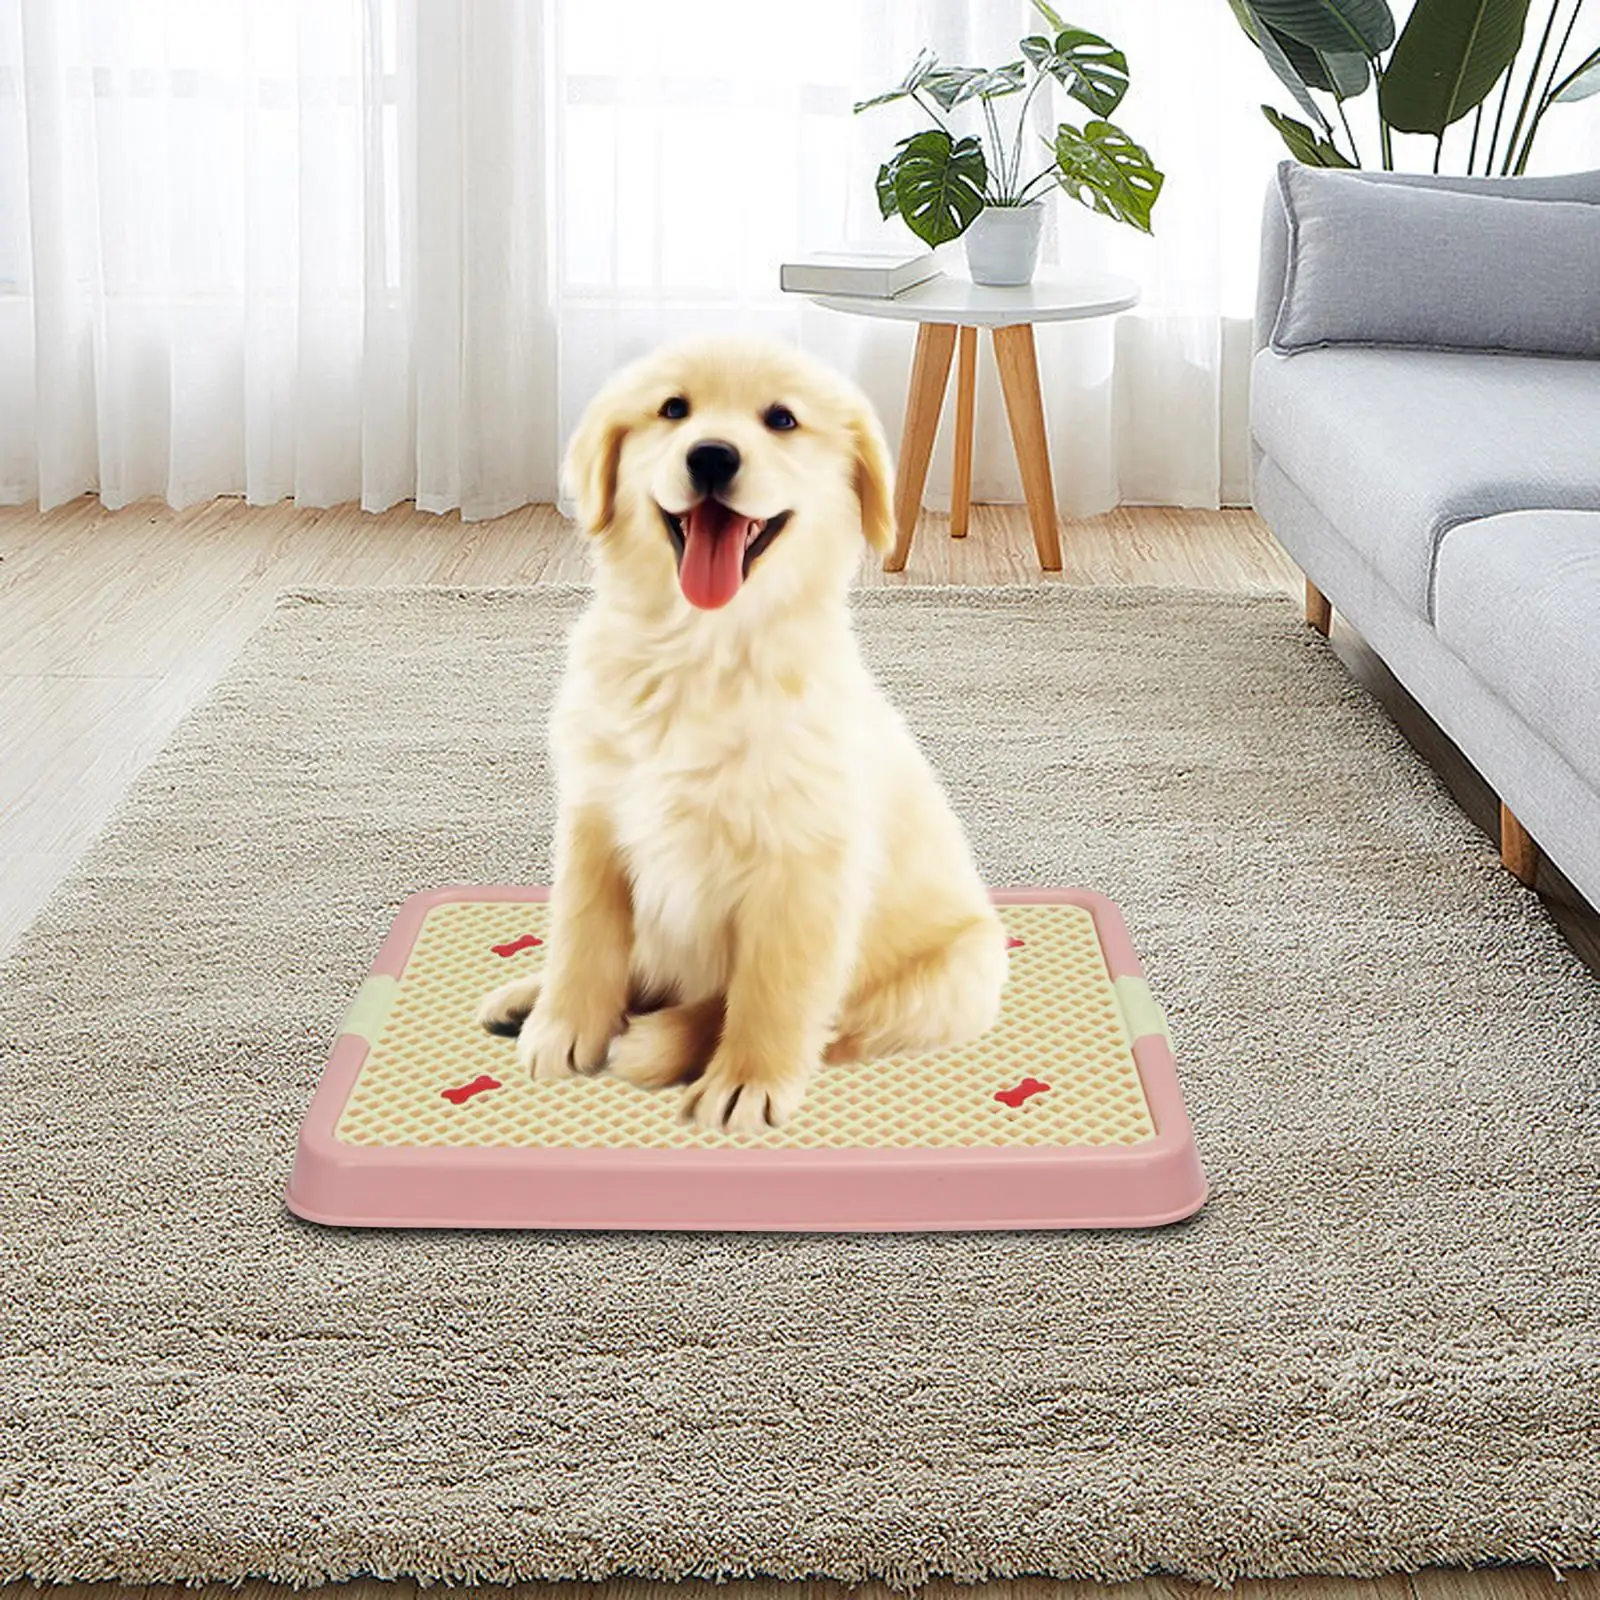 Portable Pet Toilet Puppy Potty Tray Litter Pan Indoor Outdoor Removable Pee Pad Holder for Cat for Small and Medium Dogs Bunny